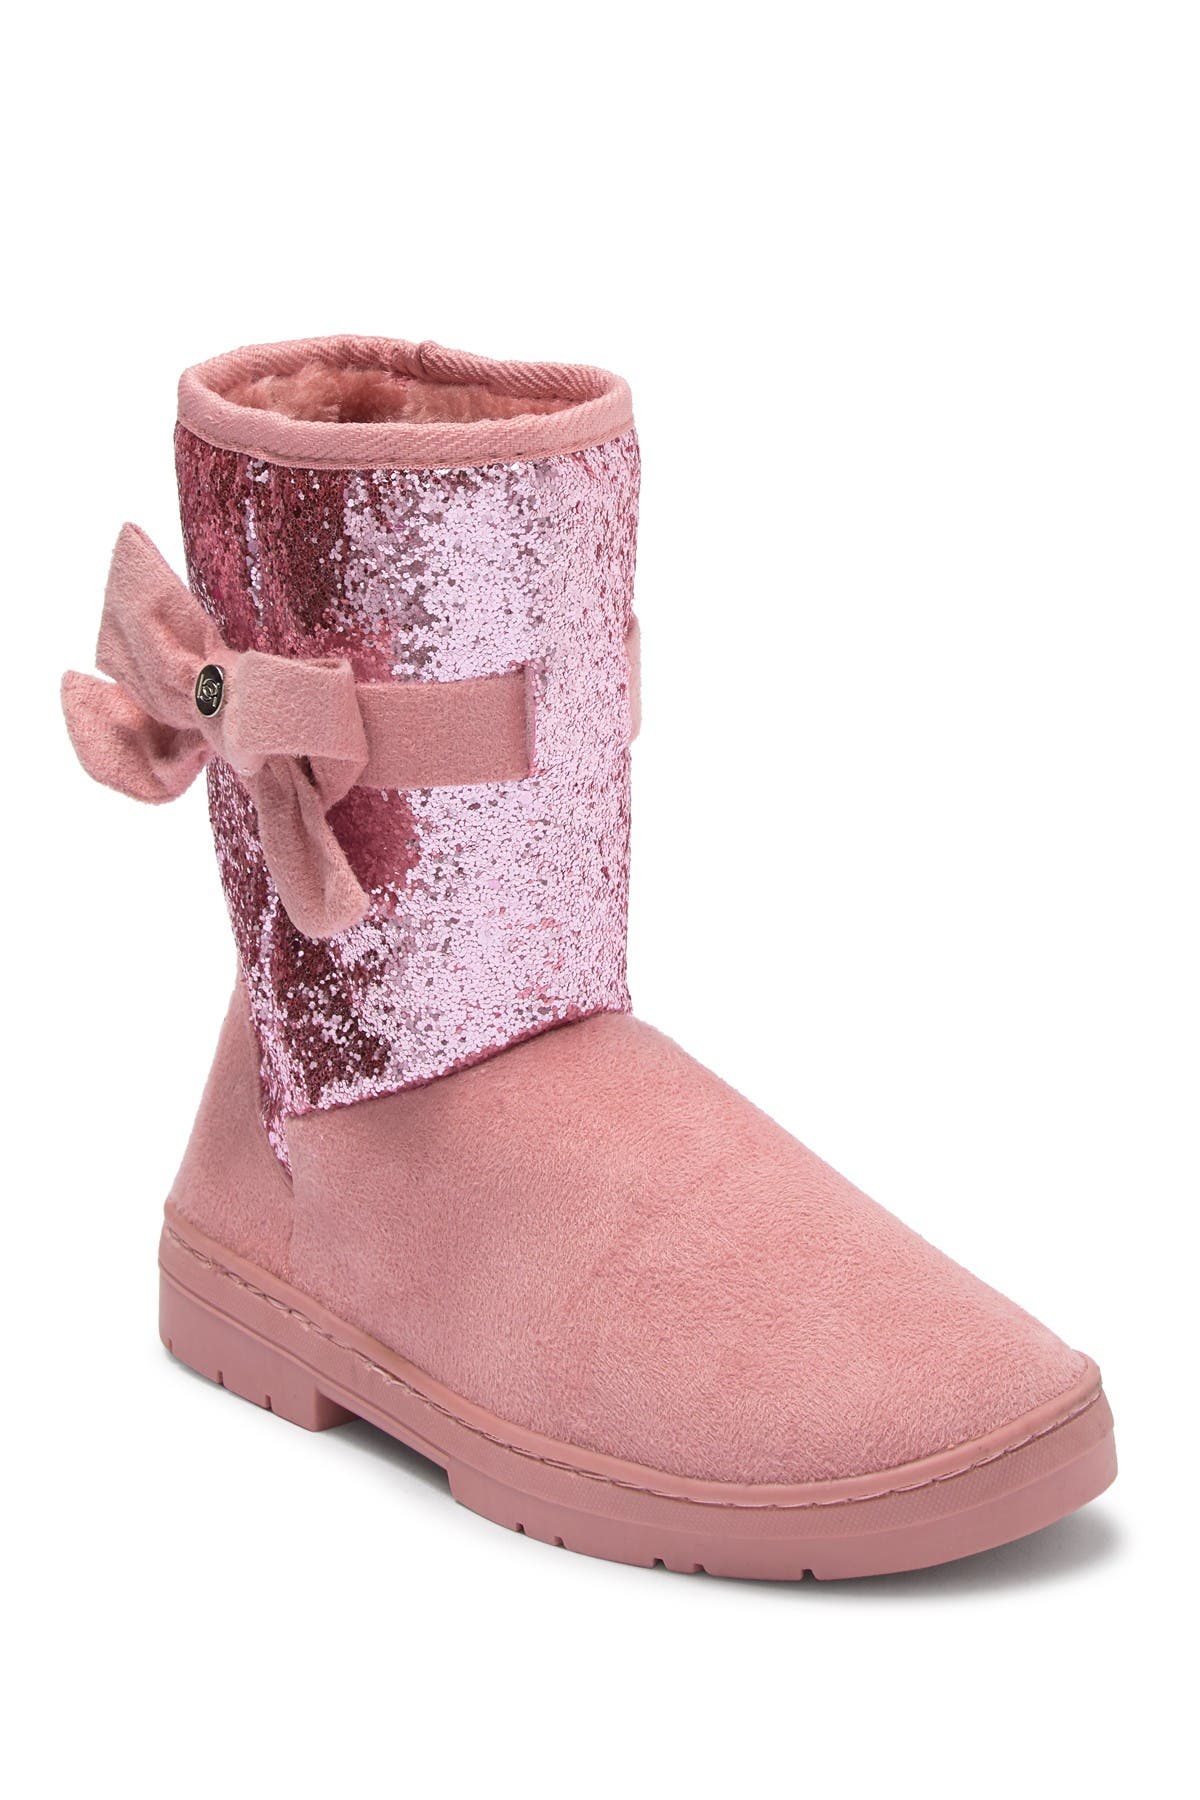 bebe boots for toddlers